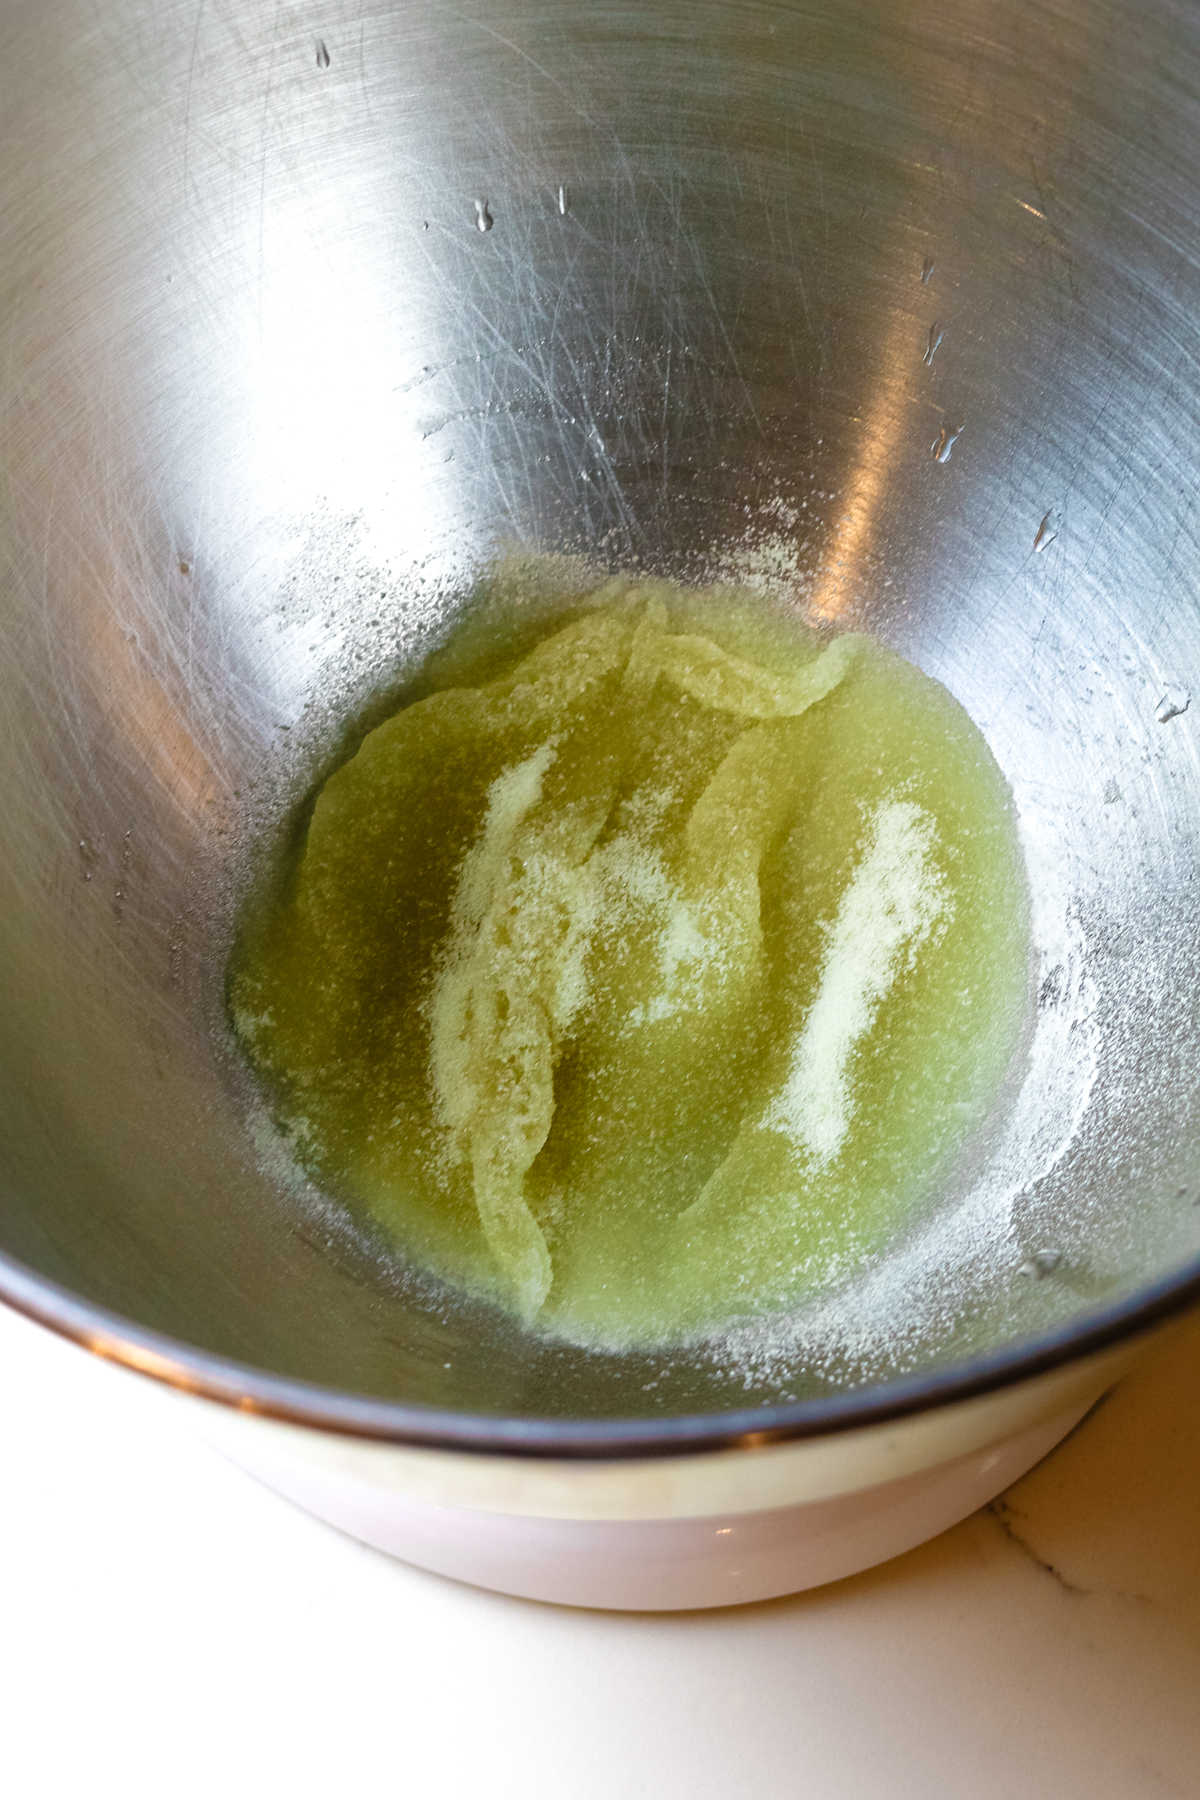 gelatin being bloomed with a bit of water in a bowl of a stand mixer.